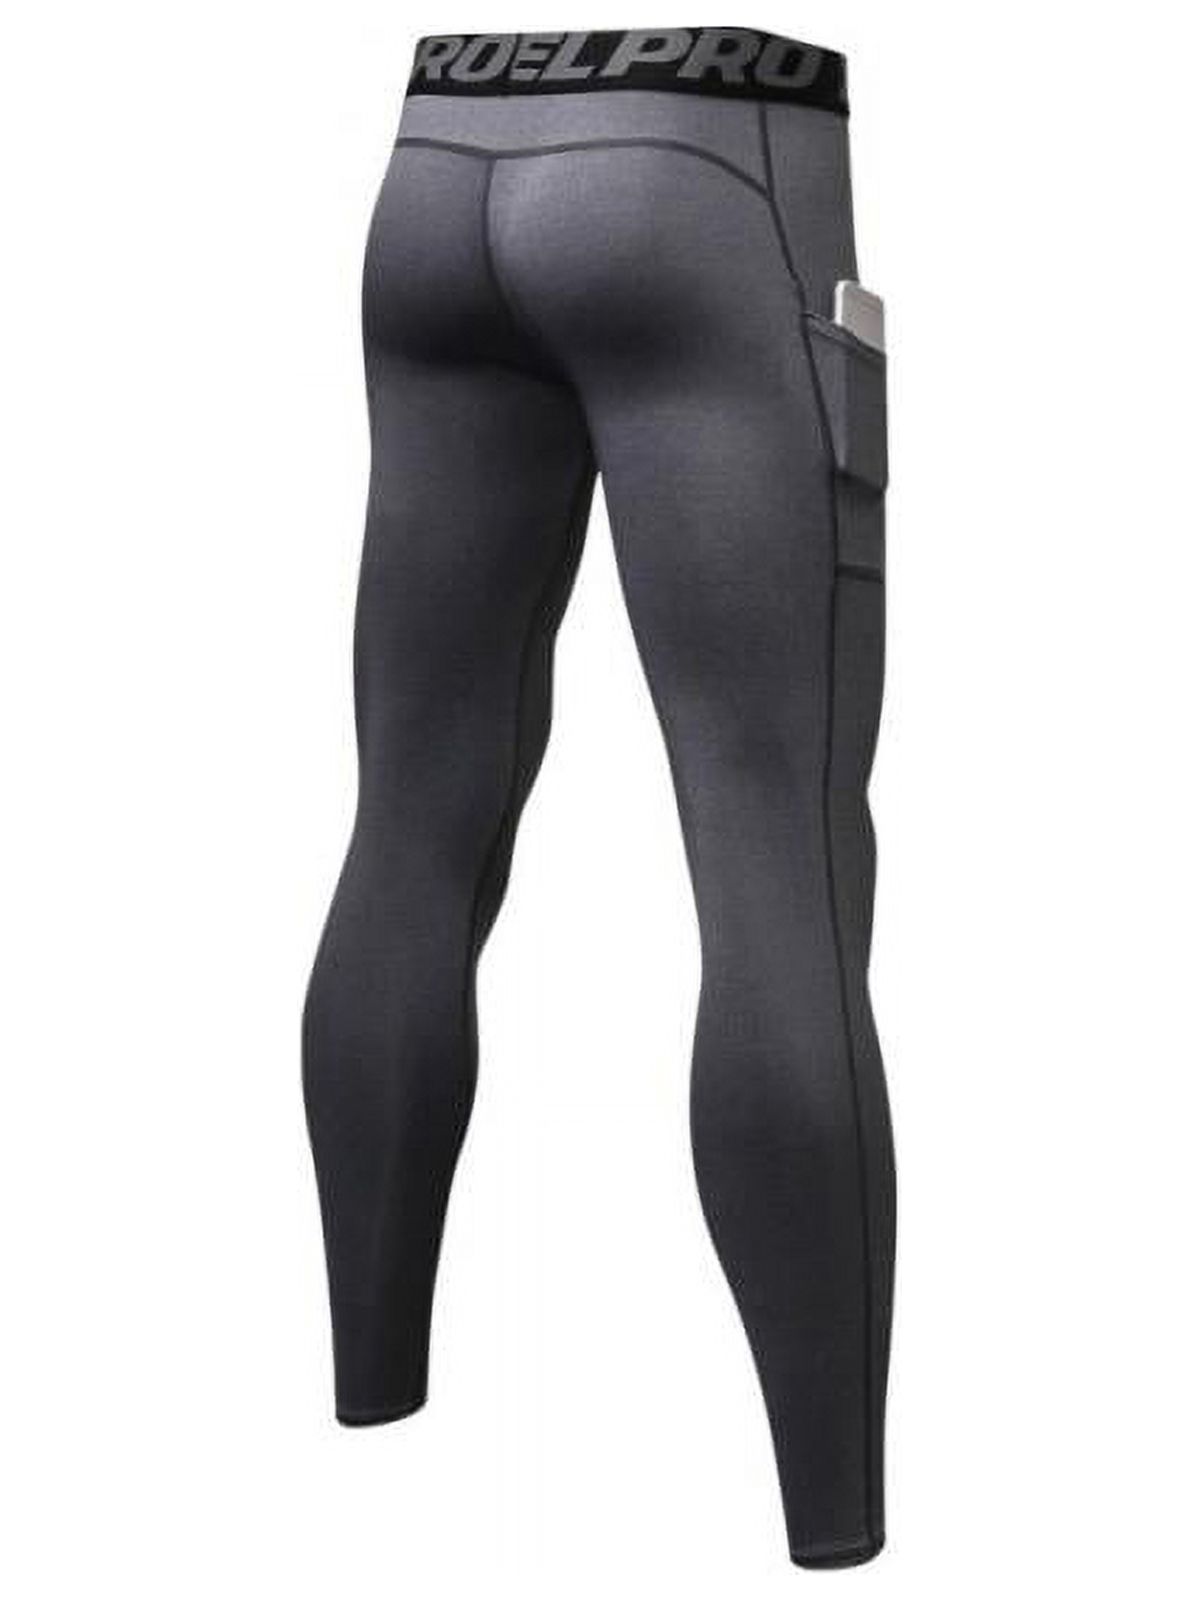 Leezo Men's Compression Pants Running Baselayer Cool Dry Sports Tights Out Pocket - image 2 of 2